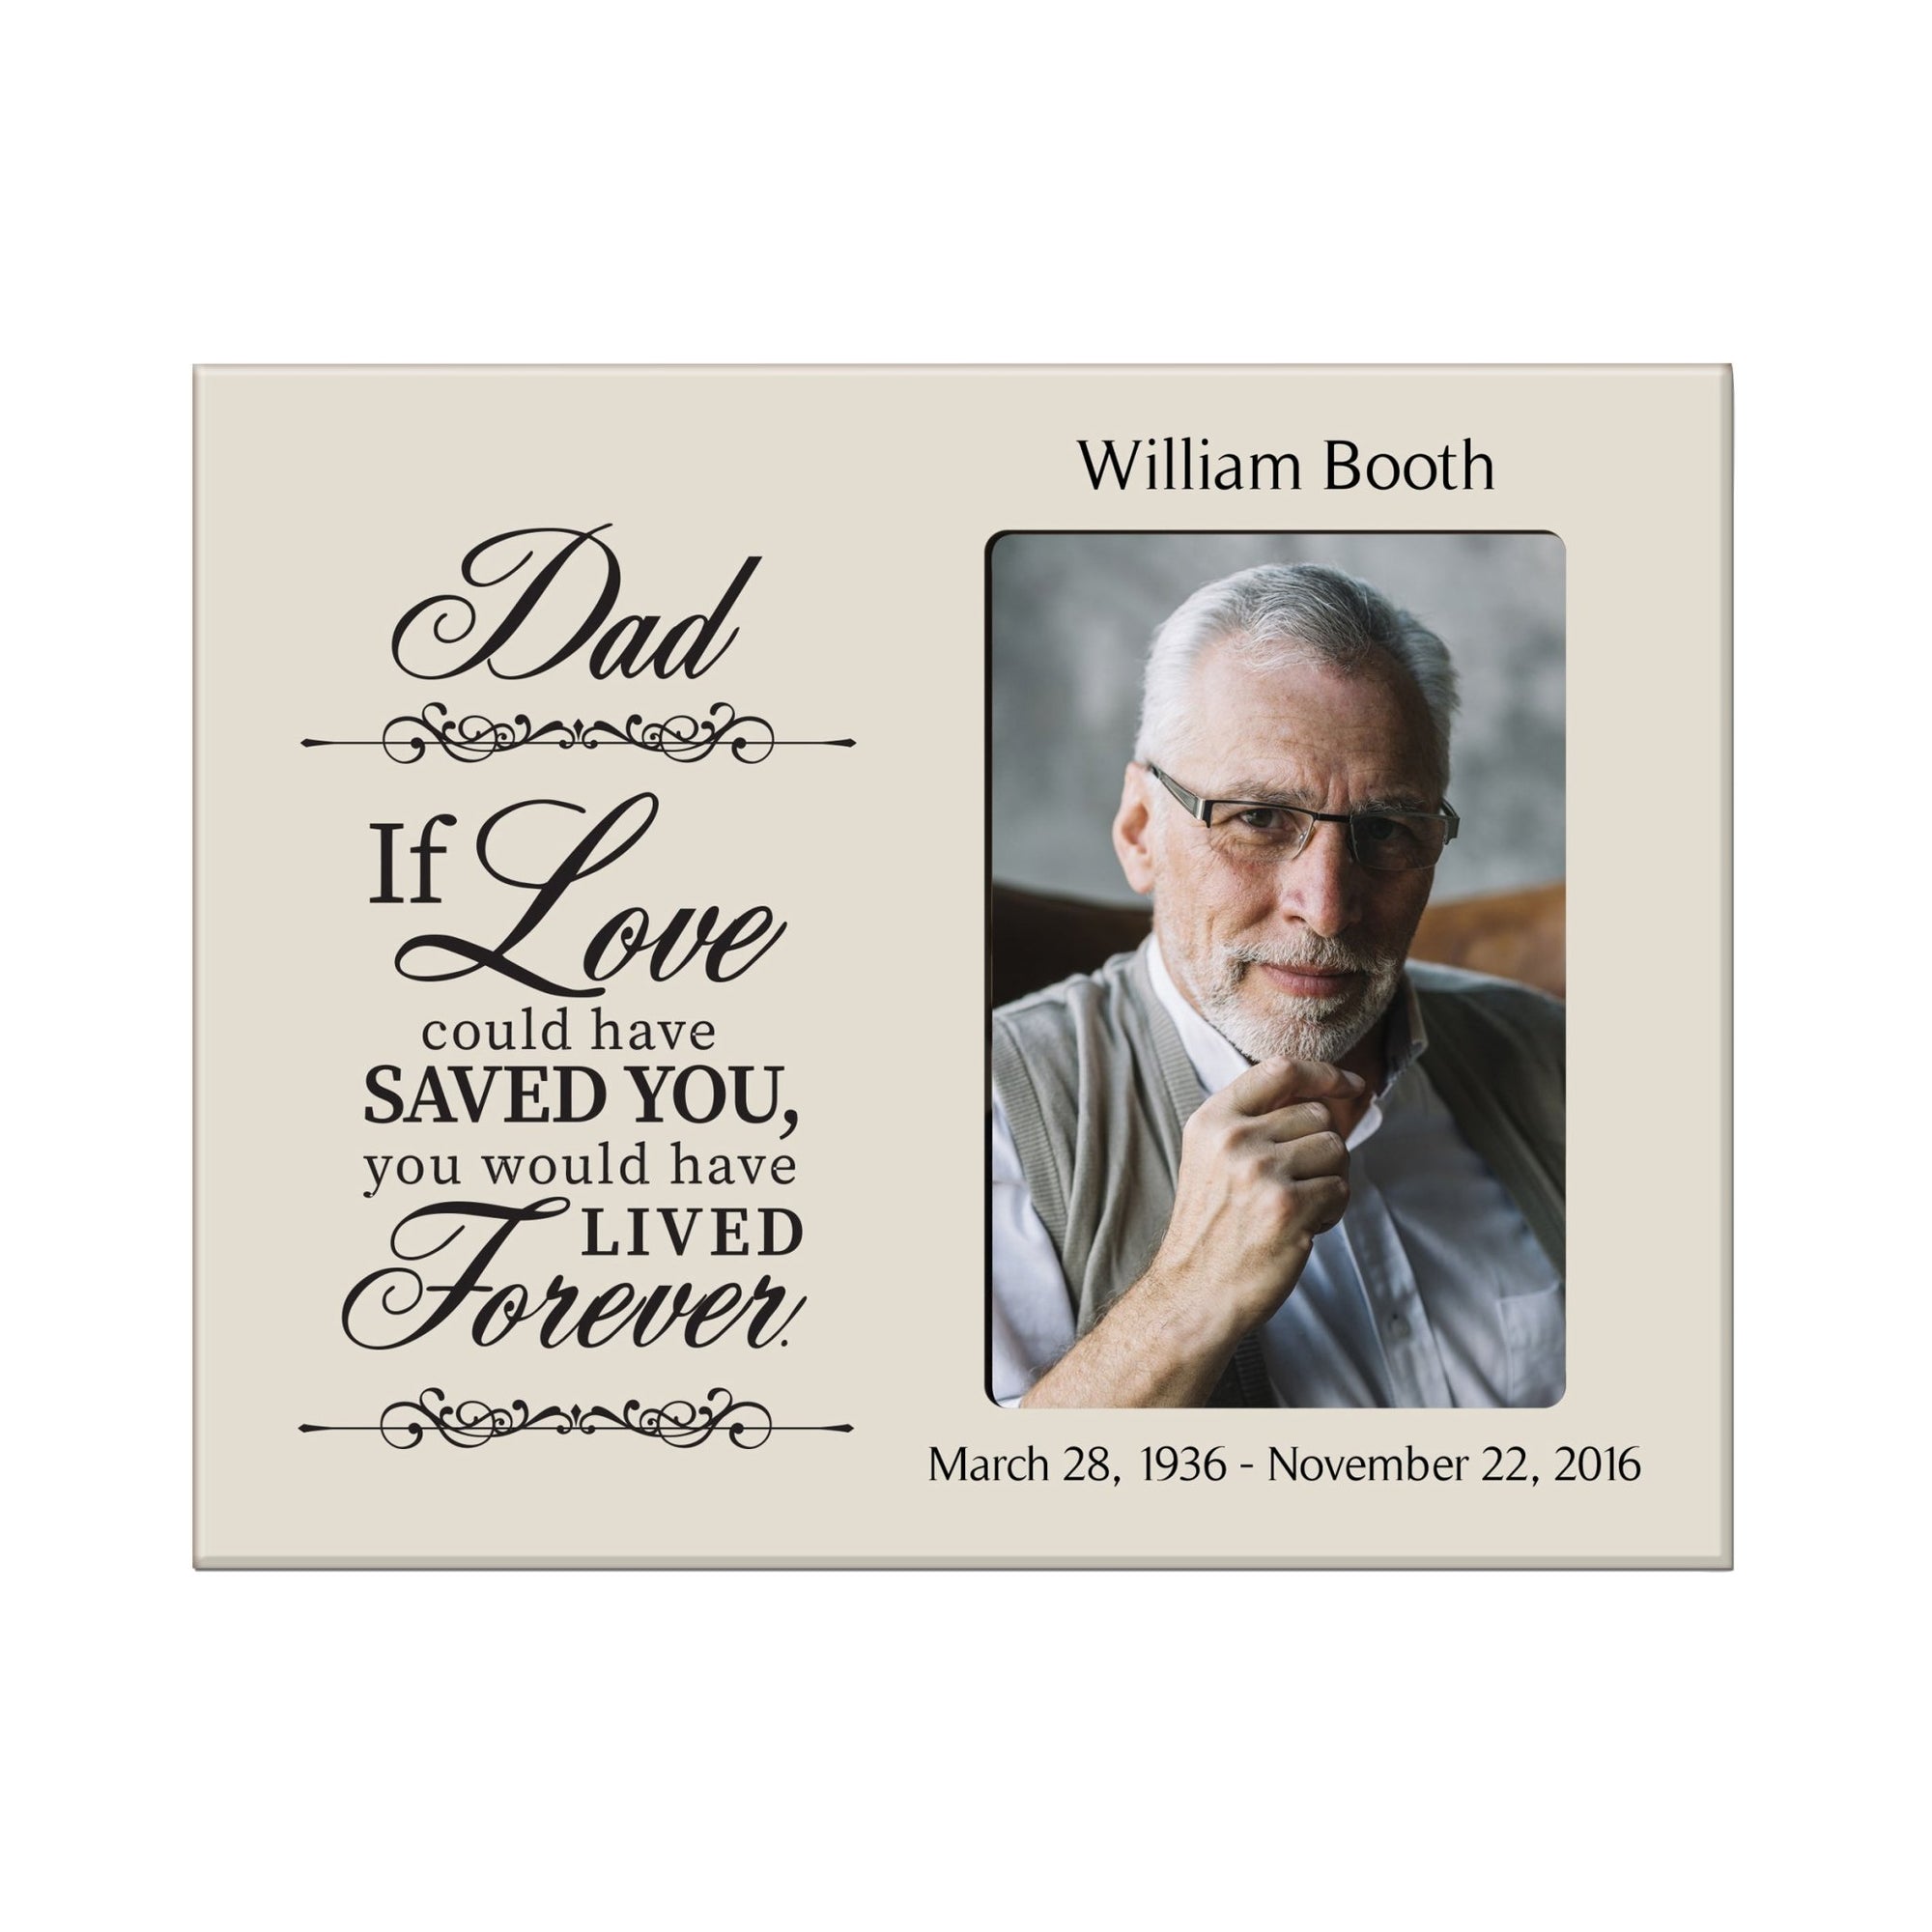 Personalized Wooden Memorial 8x10 Picture Frame holds 4x6 photo Dad, If Love Could - LifeSong Milestones